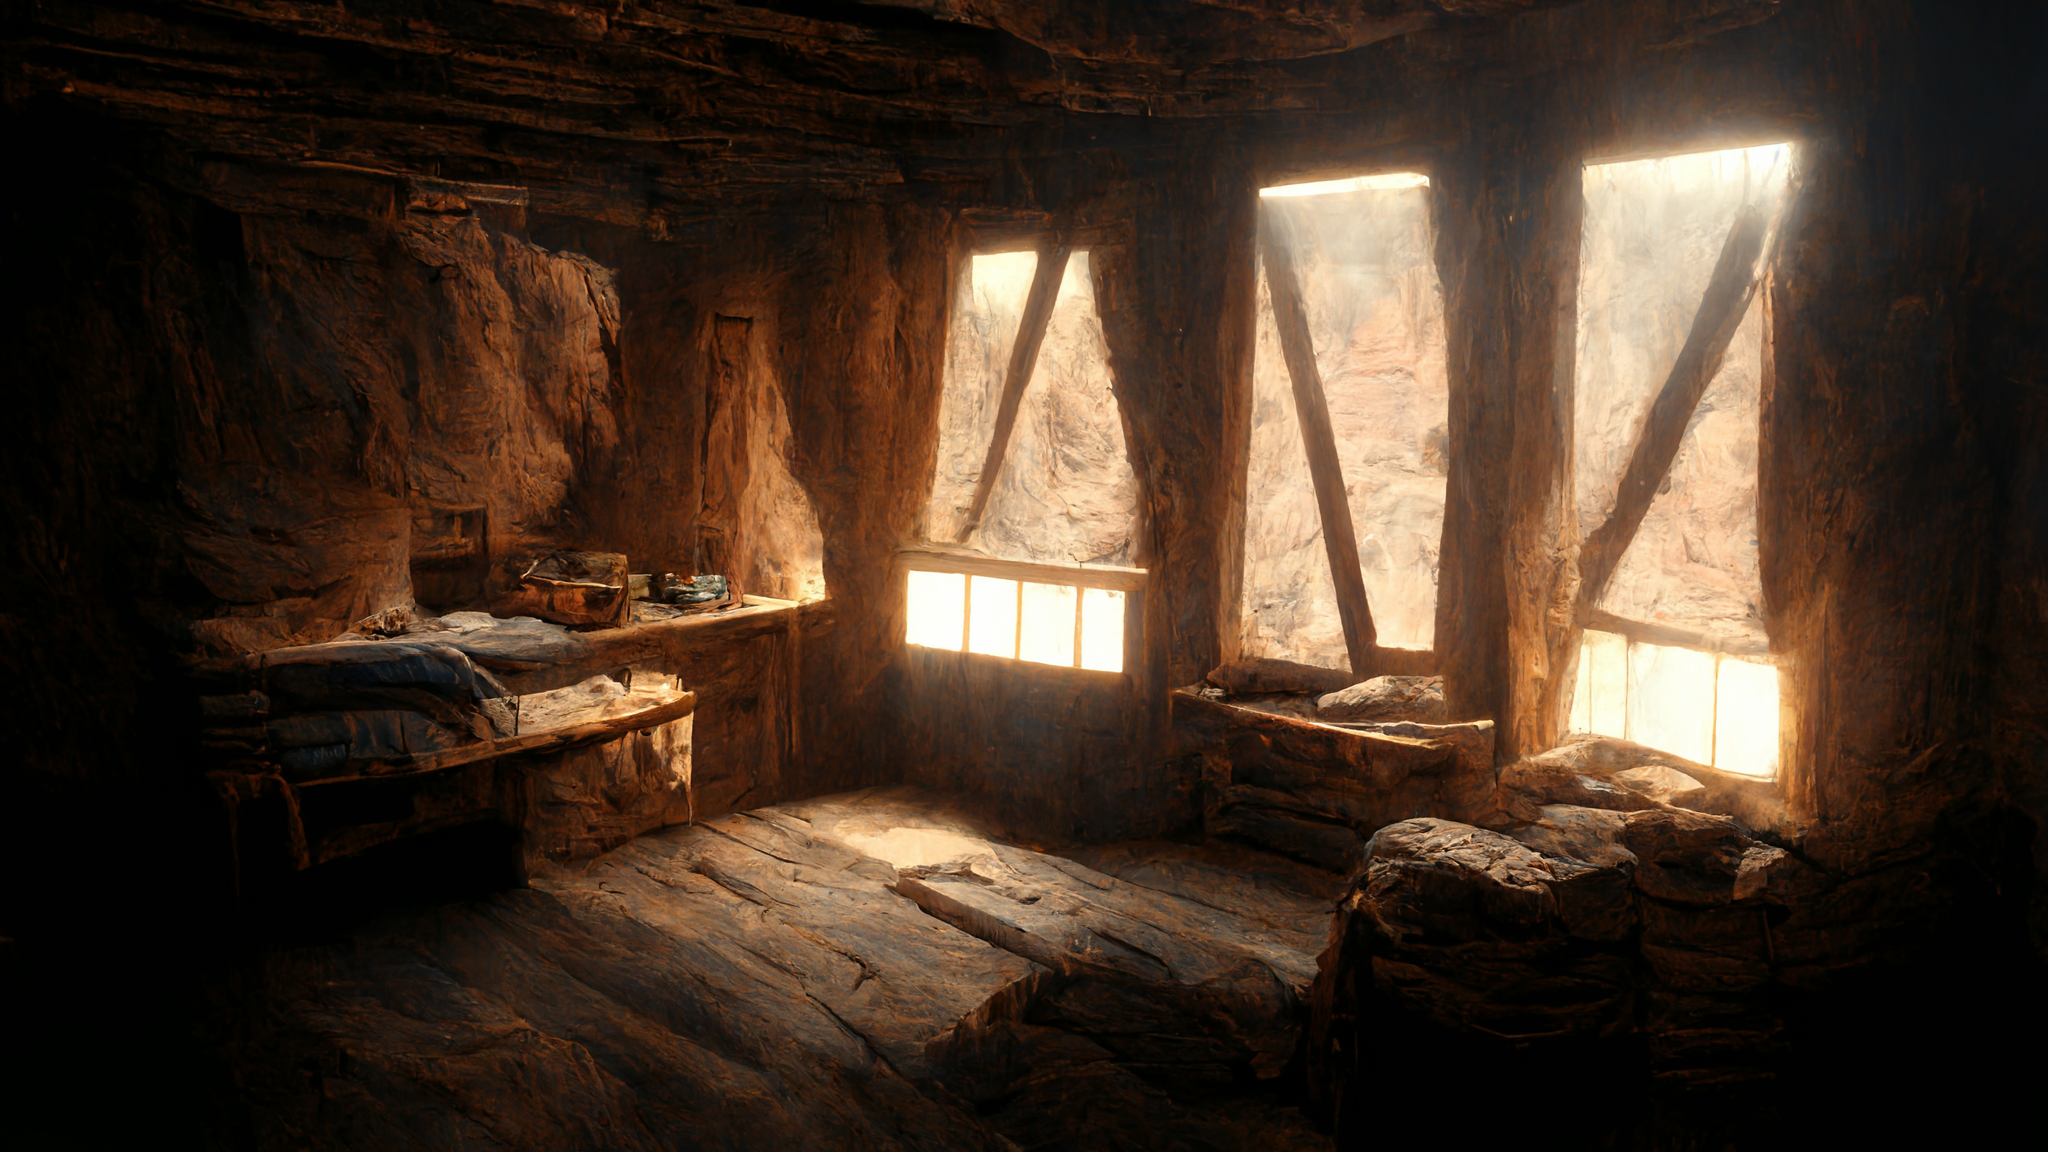 Displaying a file named Grunderwear_united_states_1880_old_miners_cabin_ebedded_in_moun_70b5c39a-d50c-4abd-92fb-2e62b120f886.png